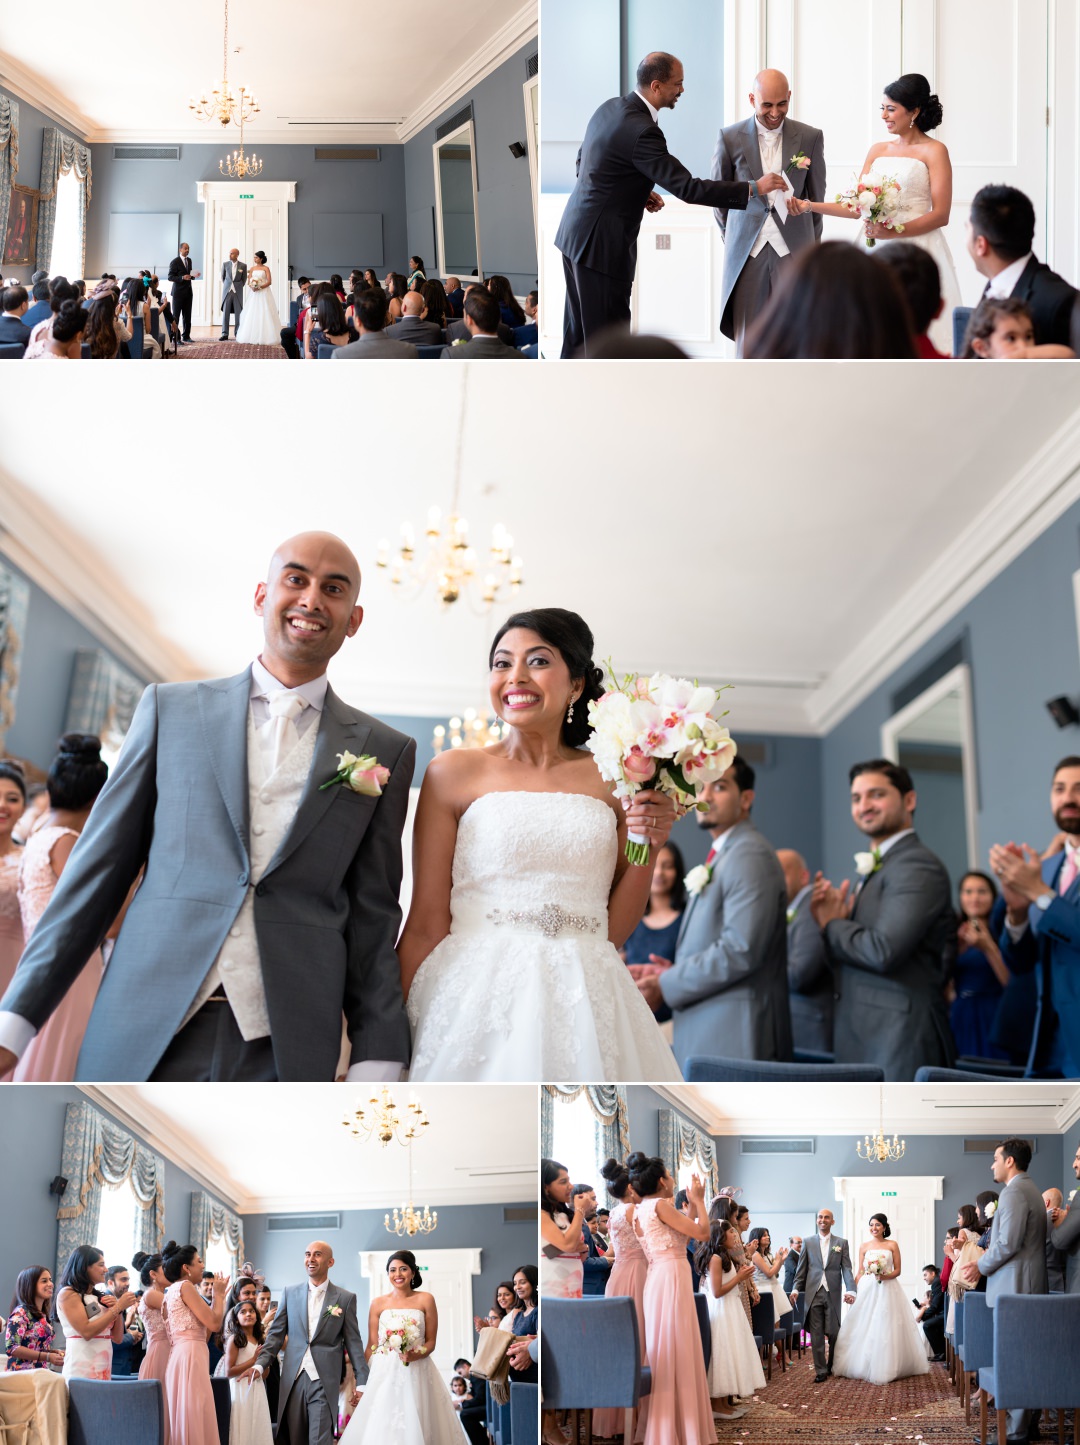 just married at King's College London Wedding